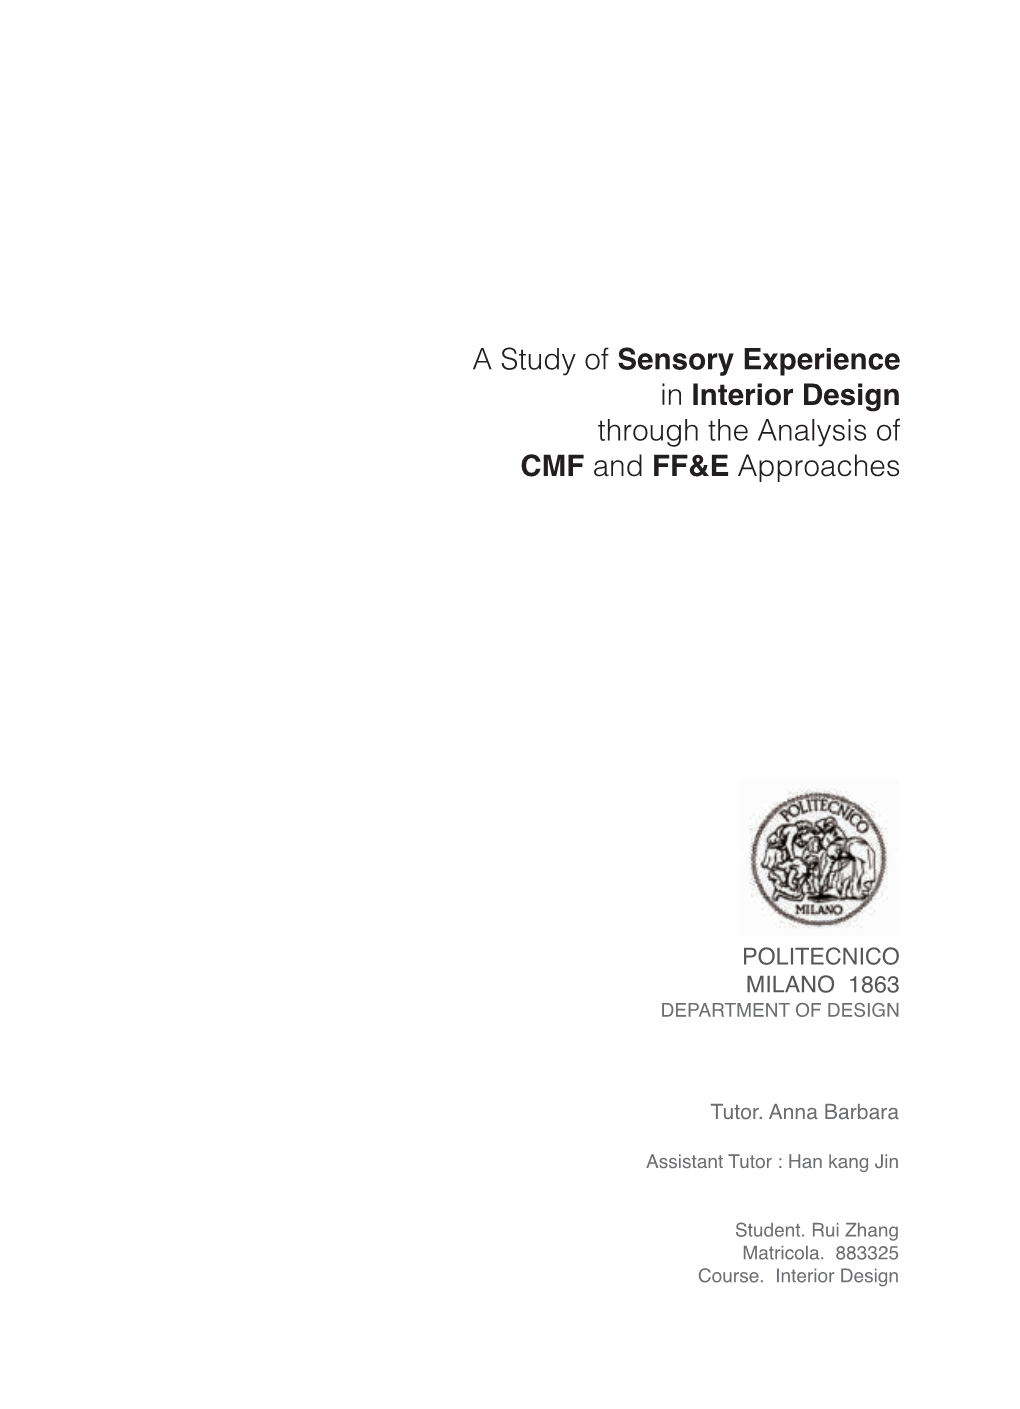 A Study of Sensory Experience in Interior Design Through the Analysis of CMF and FF&E Approaches